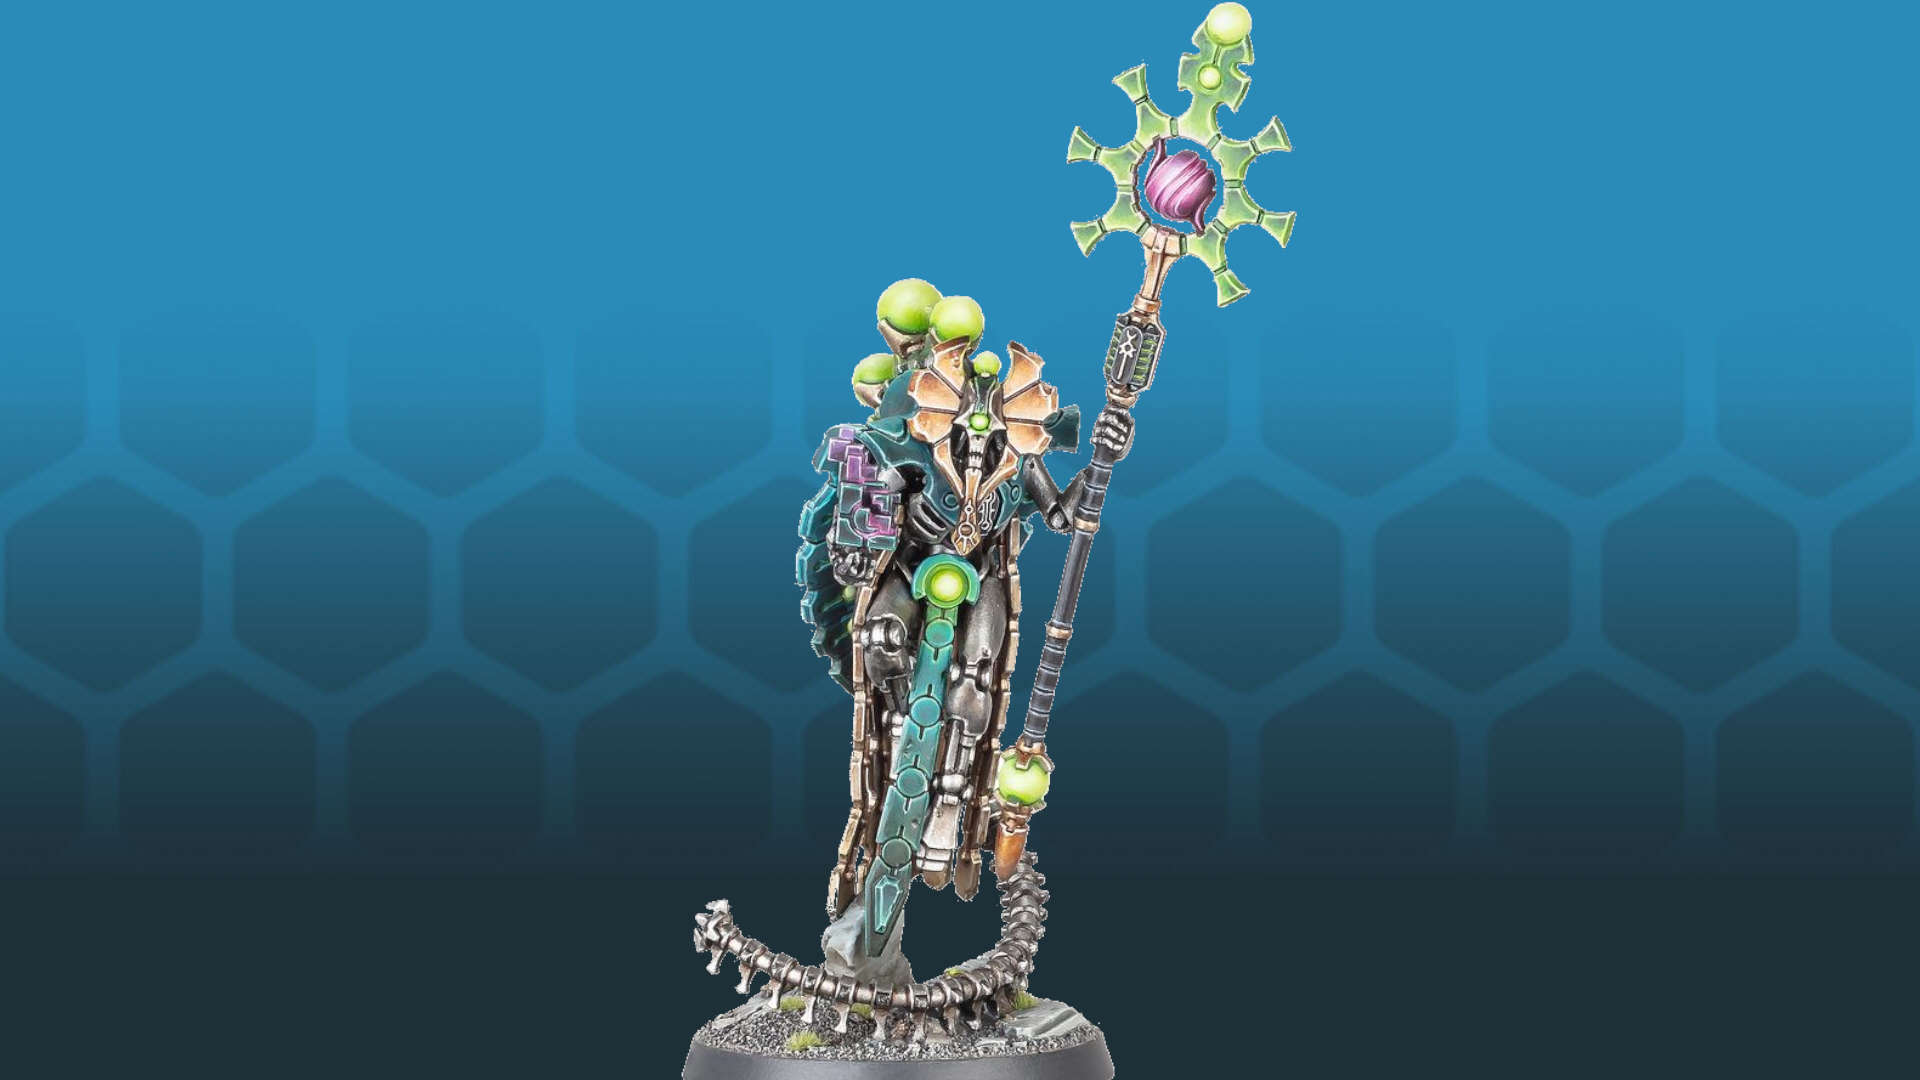 Warhammer 40k Necrons Orikan the Diviner - a mysterious, cycloptic android with the aspect of a priest or wizard, wielding a staff tipped with a star